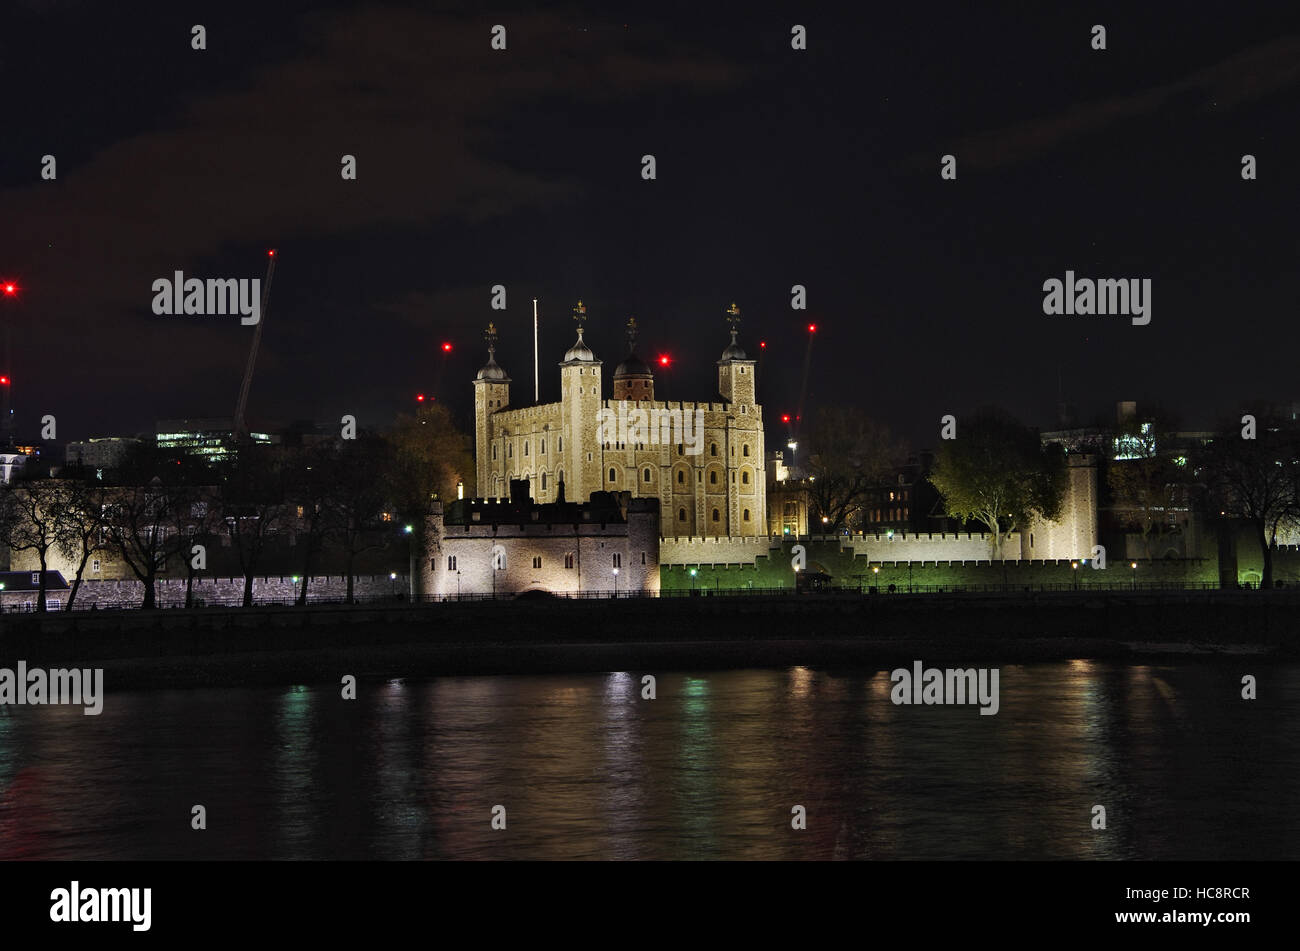 LONDON,UK - 01 DEC 2016 - View of the Tower of London at night. Stock Photo